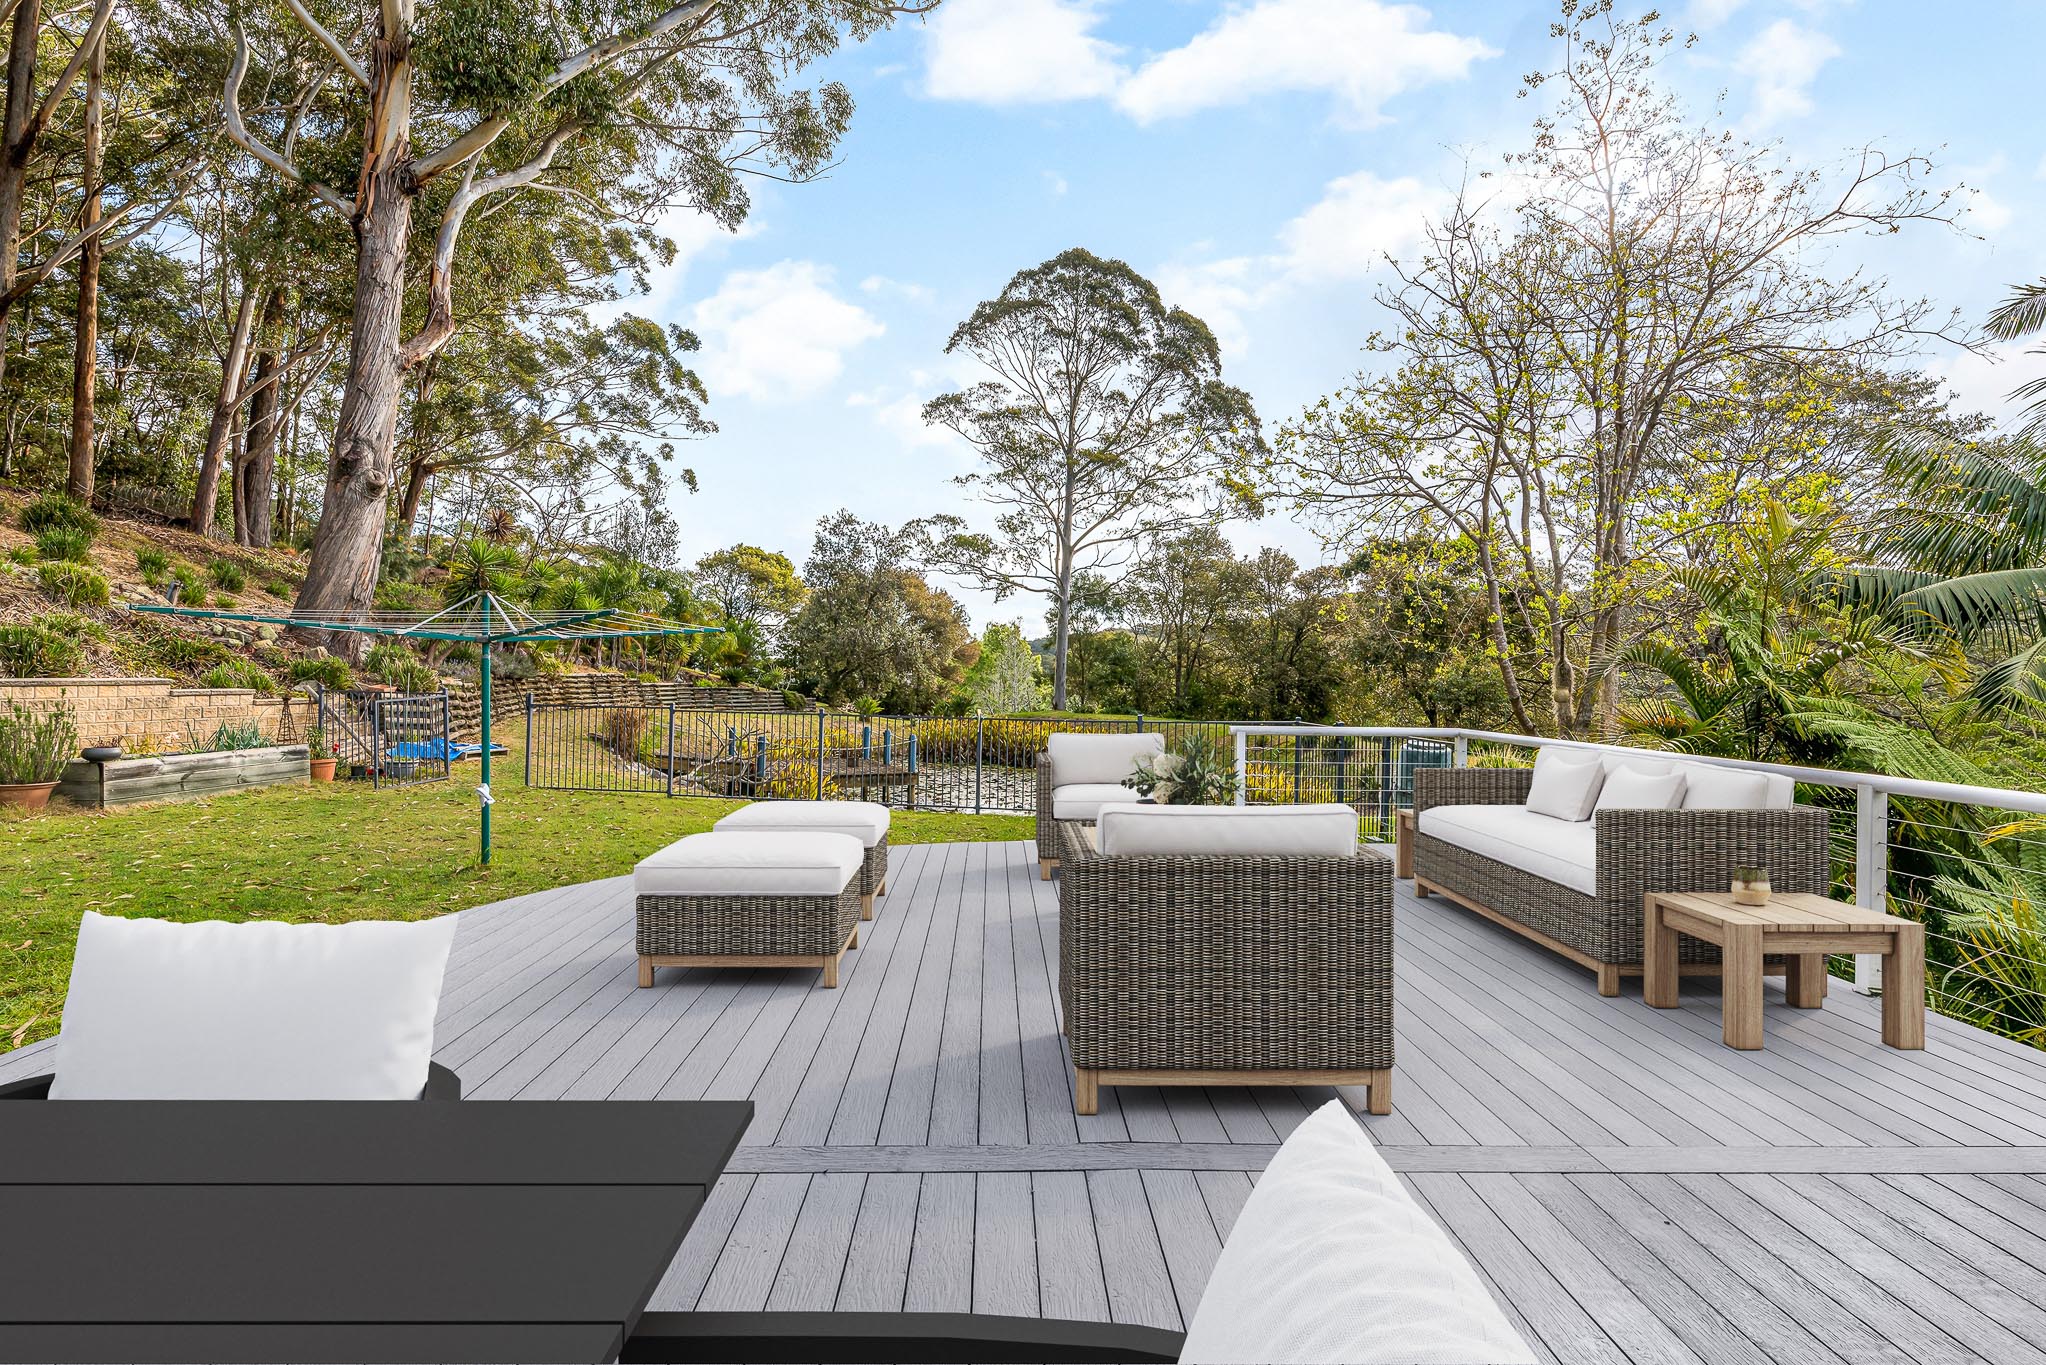 Old boat gray coloured composite decking boards decorated with modern patio furniture